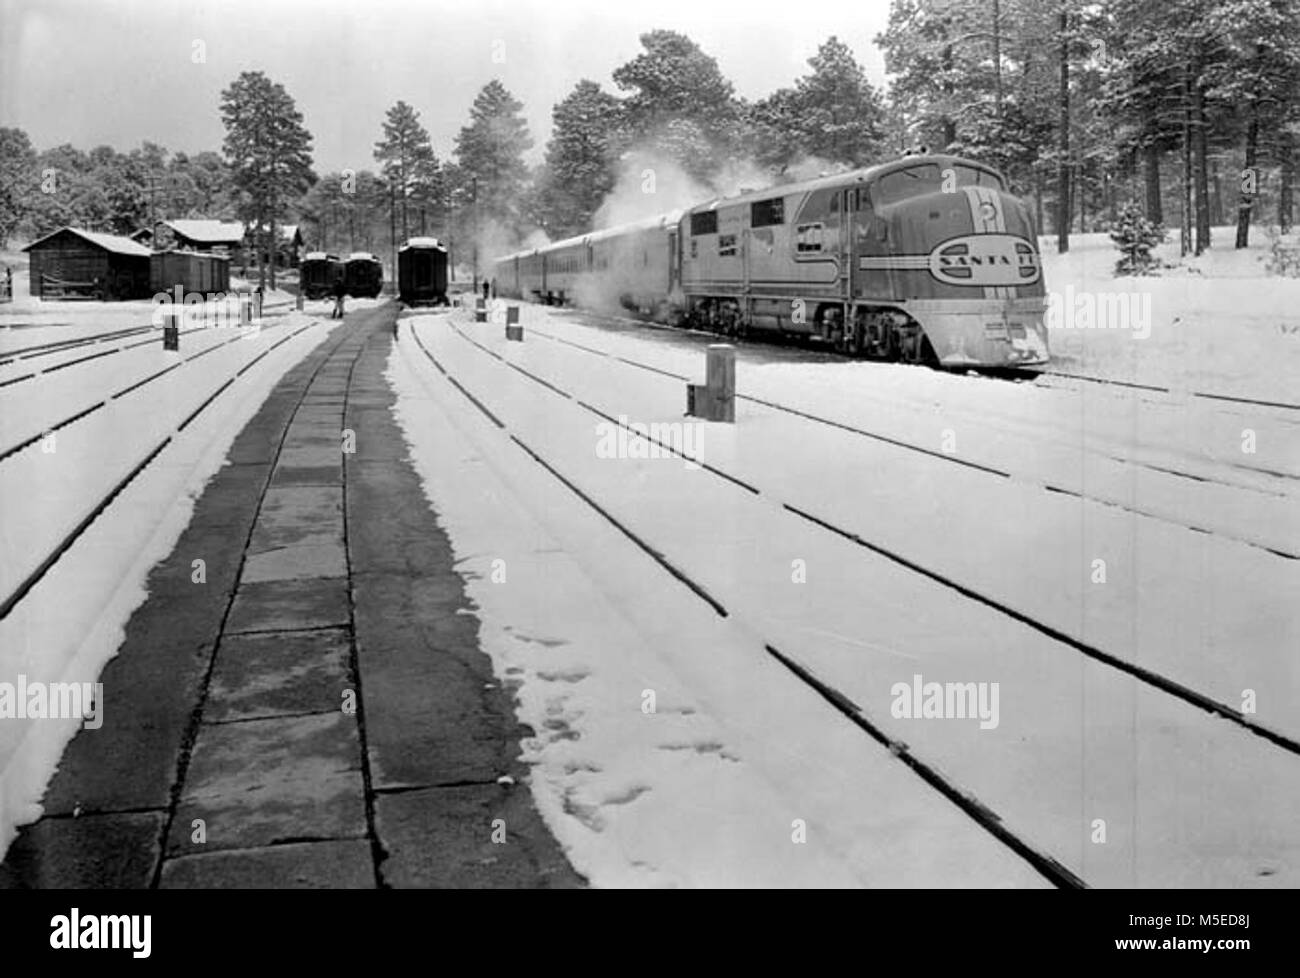 Grand Canyon Historic Railroad Depot Winter   OVERVIEW: SANTA FE TRAIN 'EL CAPITAN' IN STATION AT GRAND CANYON DURING FIRST LOS ANGELES TO CHICAGO RUN. SNOW. 19 FEB 1938 Stock Photo